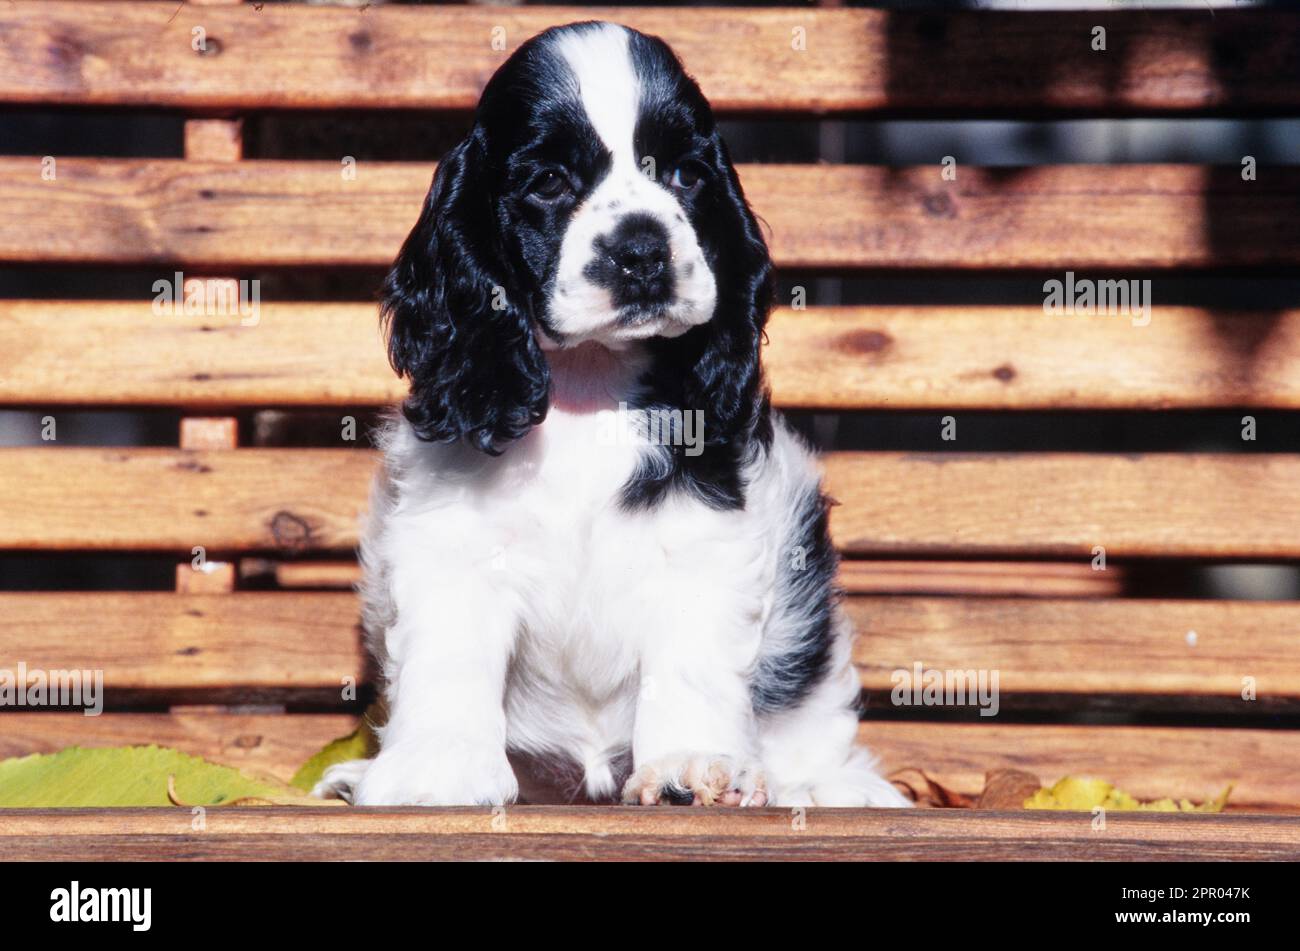 American Cocker Spaniel puppy sitting on wood bench outside Stock Photo